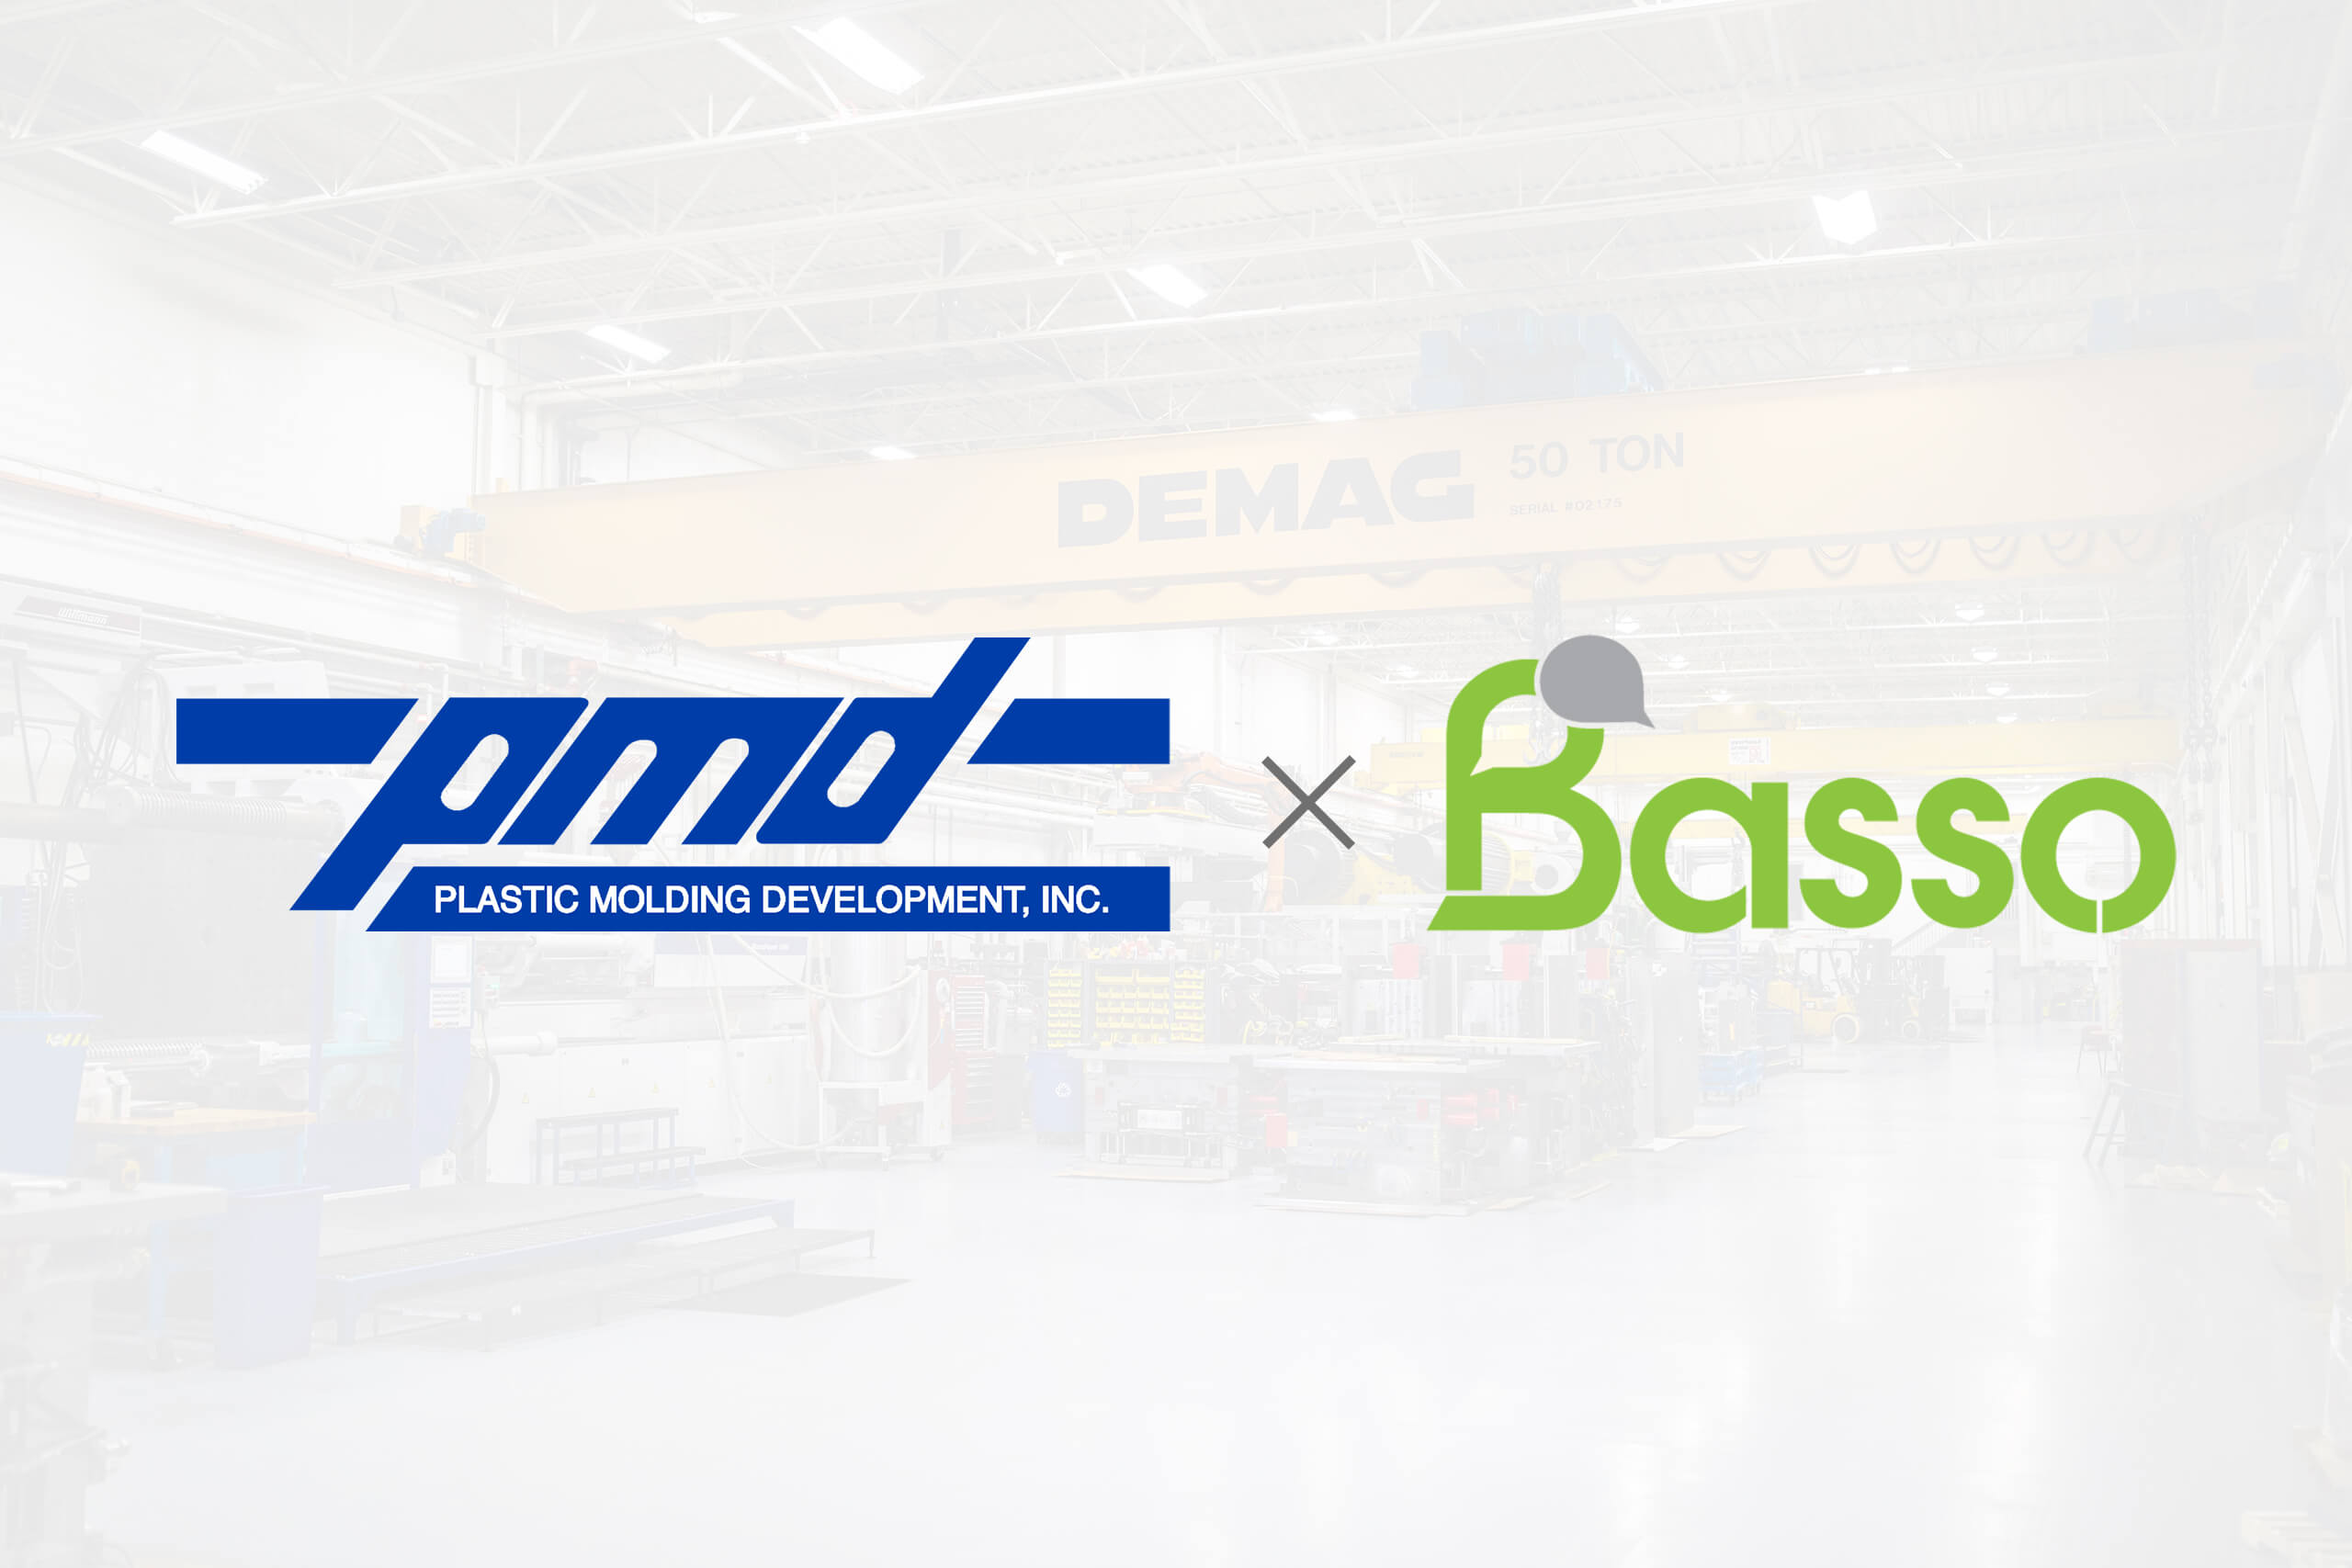 Plastic Molding Development PMD Launches Website by Basso